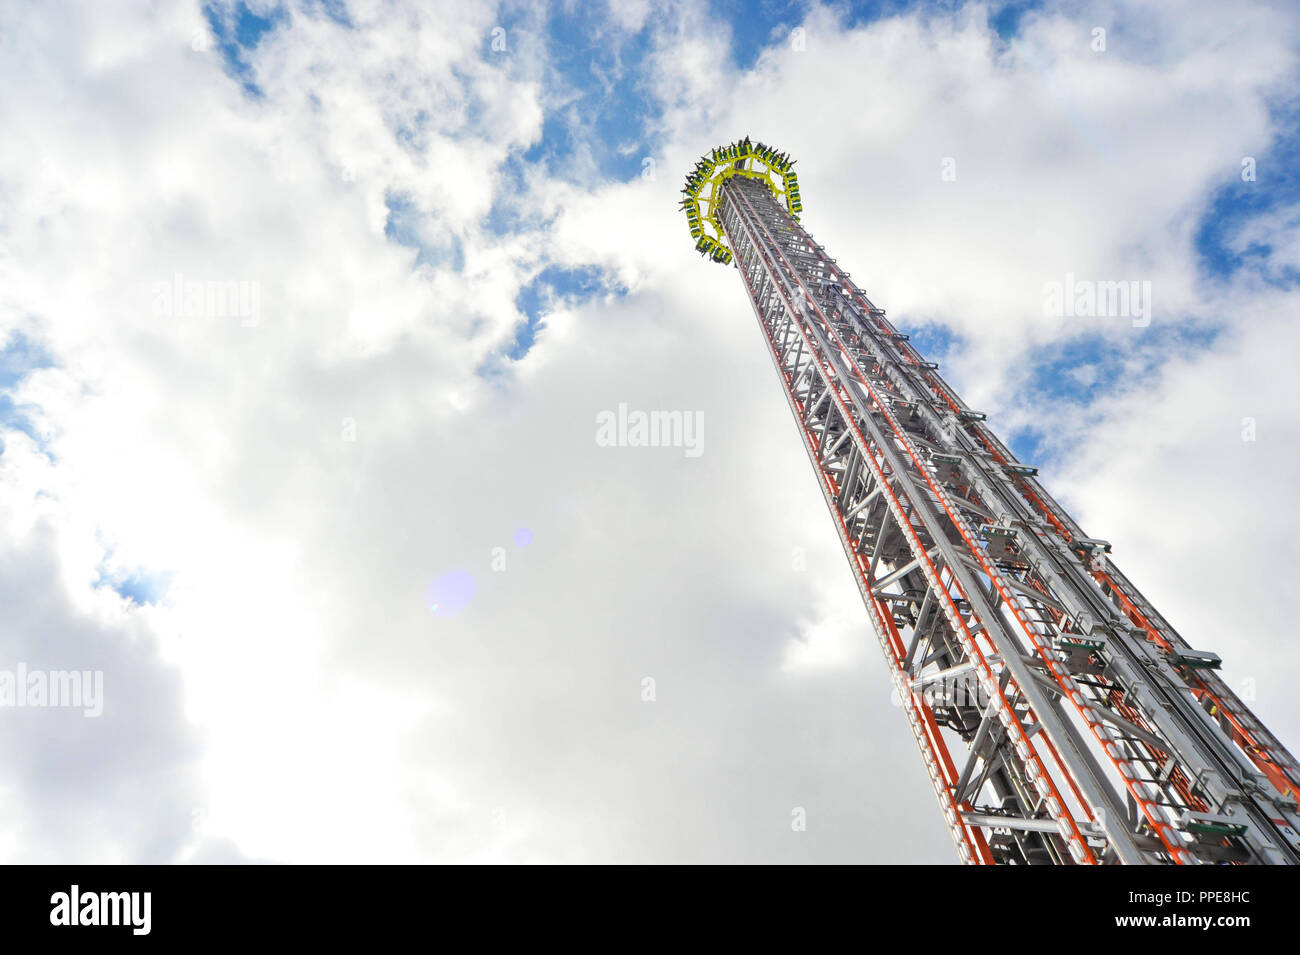 The 'Power Tower' drop tower at the Munich Oktoberfest. Stock Photo